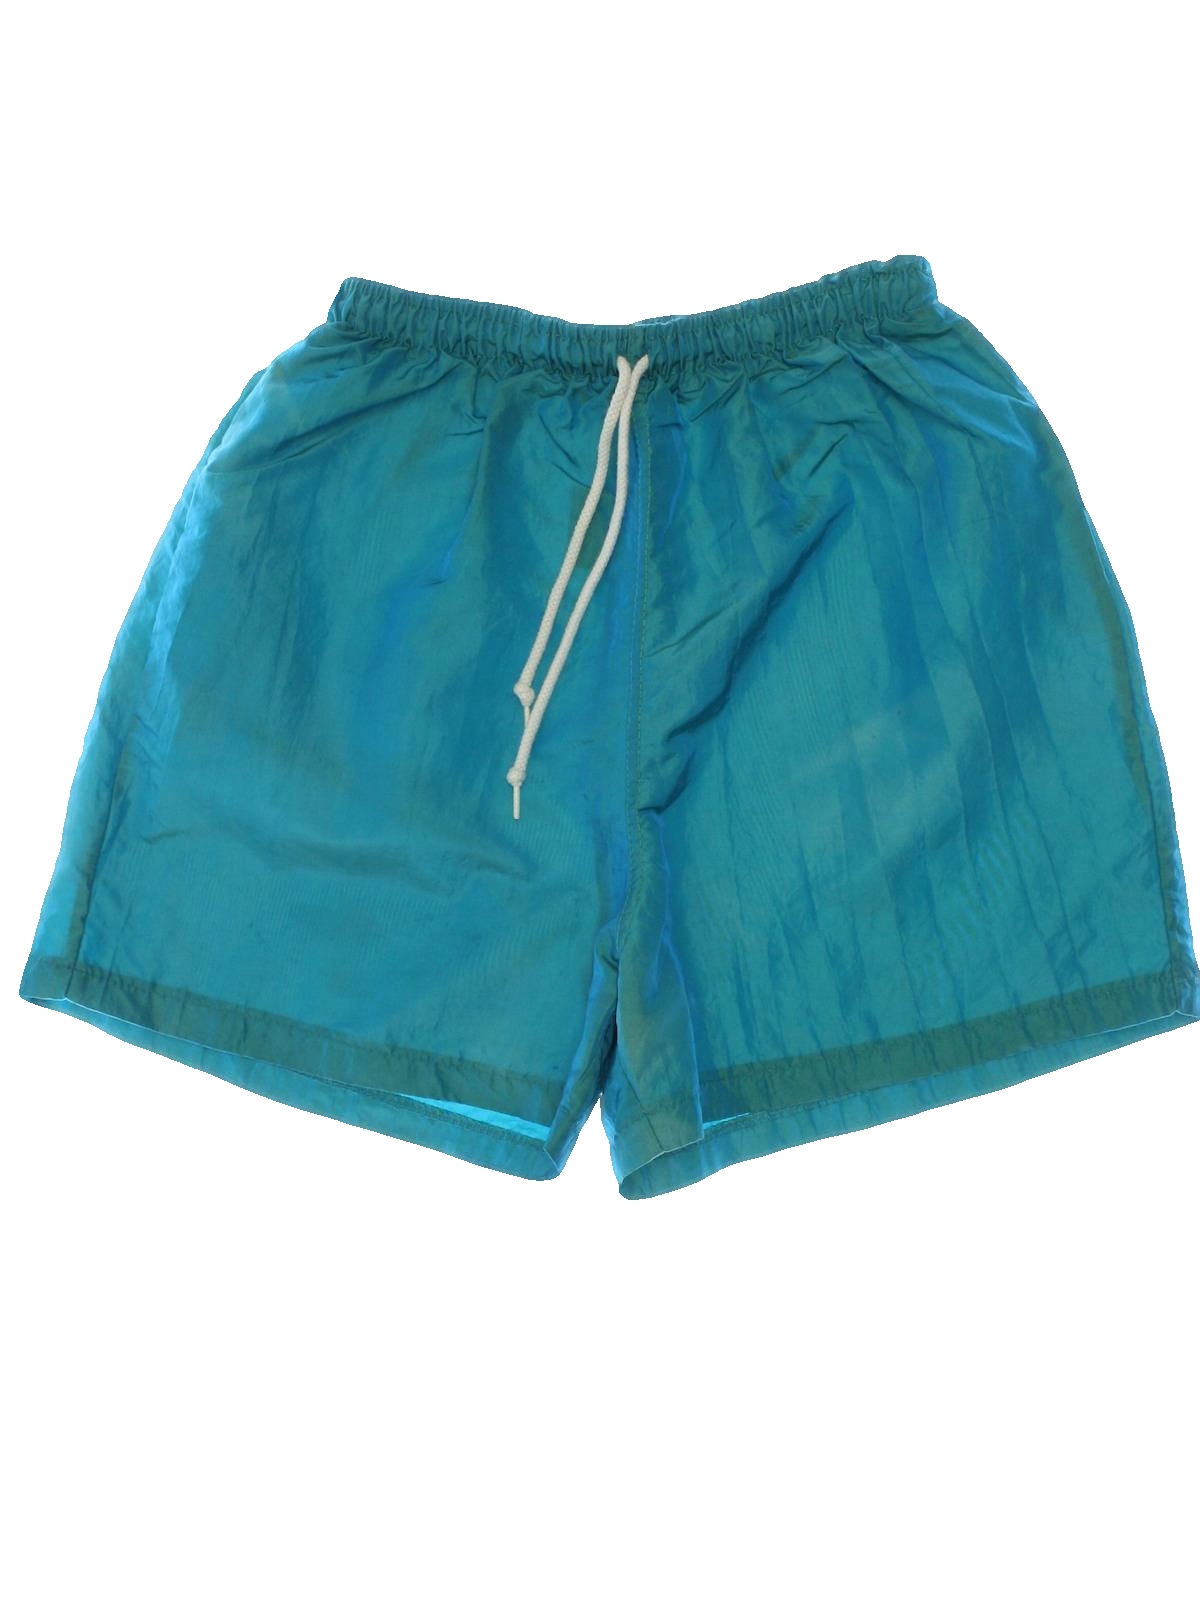 90s Vintage Exhilaration Made in USA Shorts: 90s -Exhilaration Made in ...